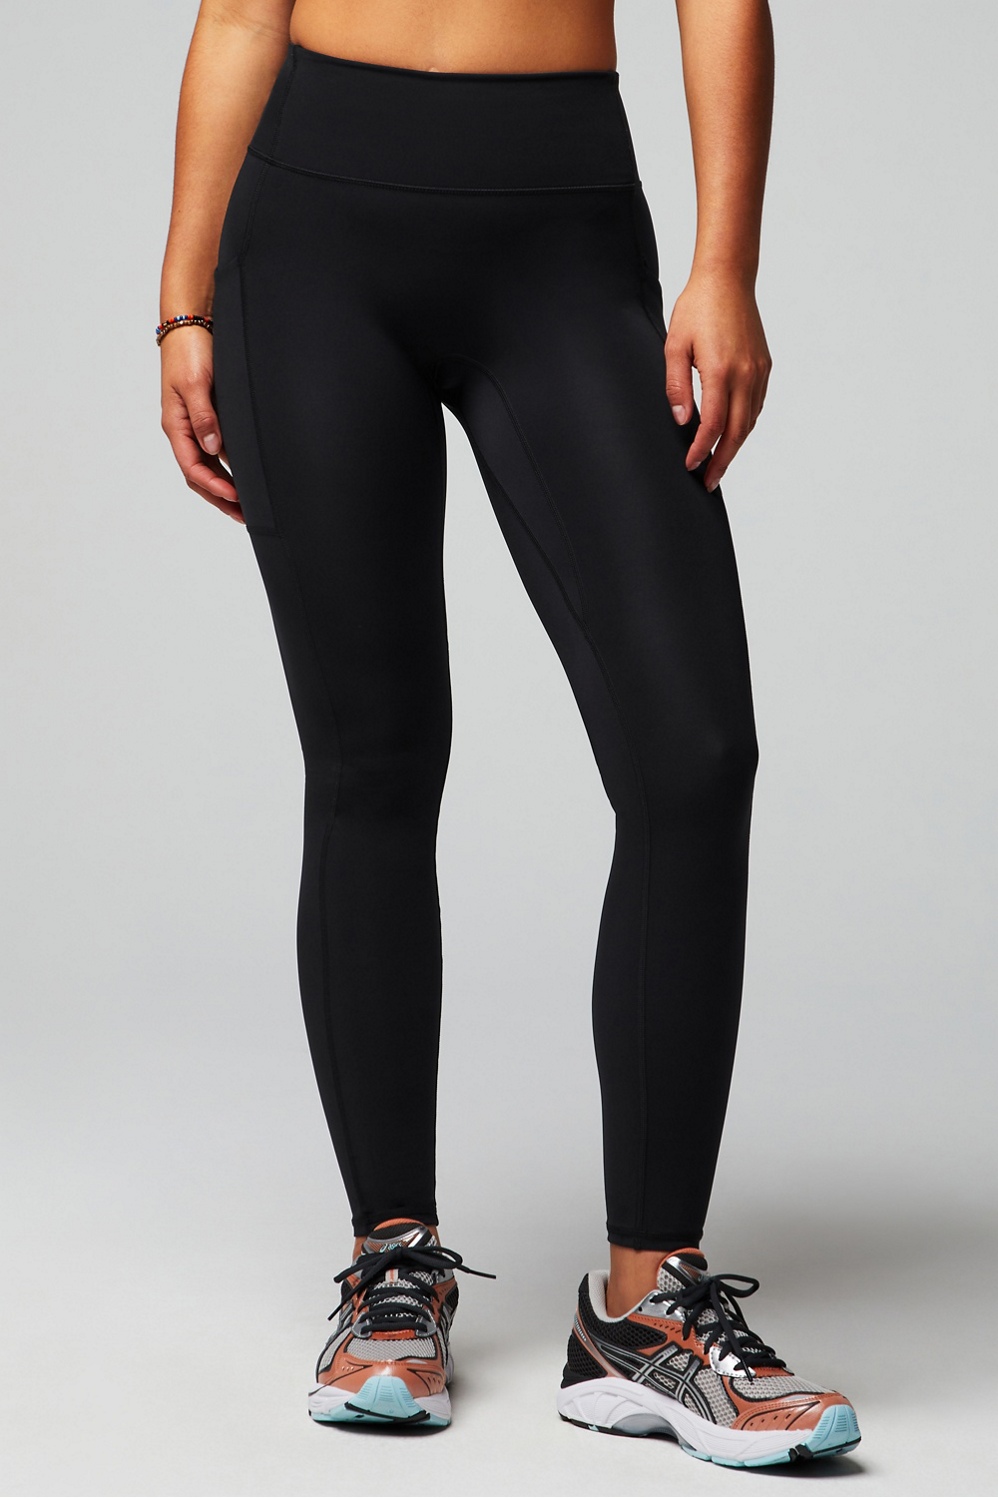 $65 FABLETICS ANYWHERE MOTION365 HIGH-WAISTED LEGGINGS - XS